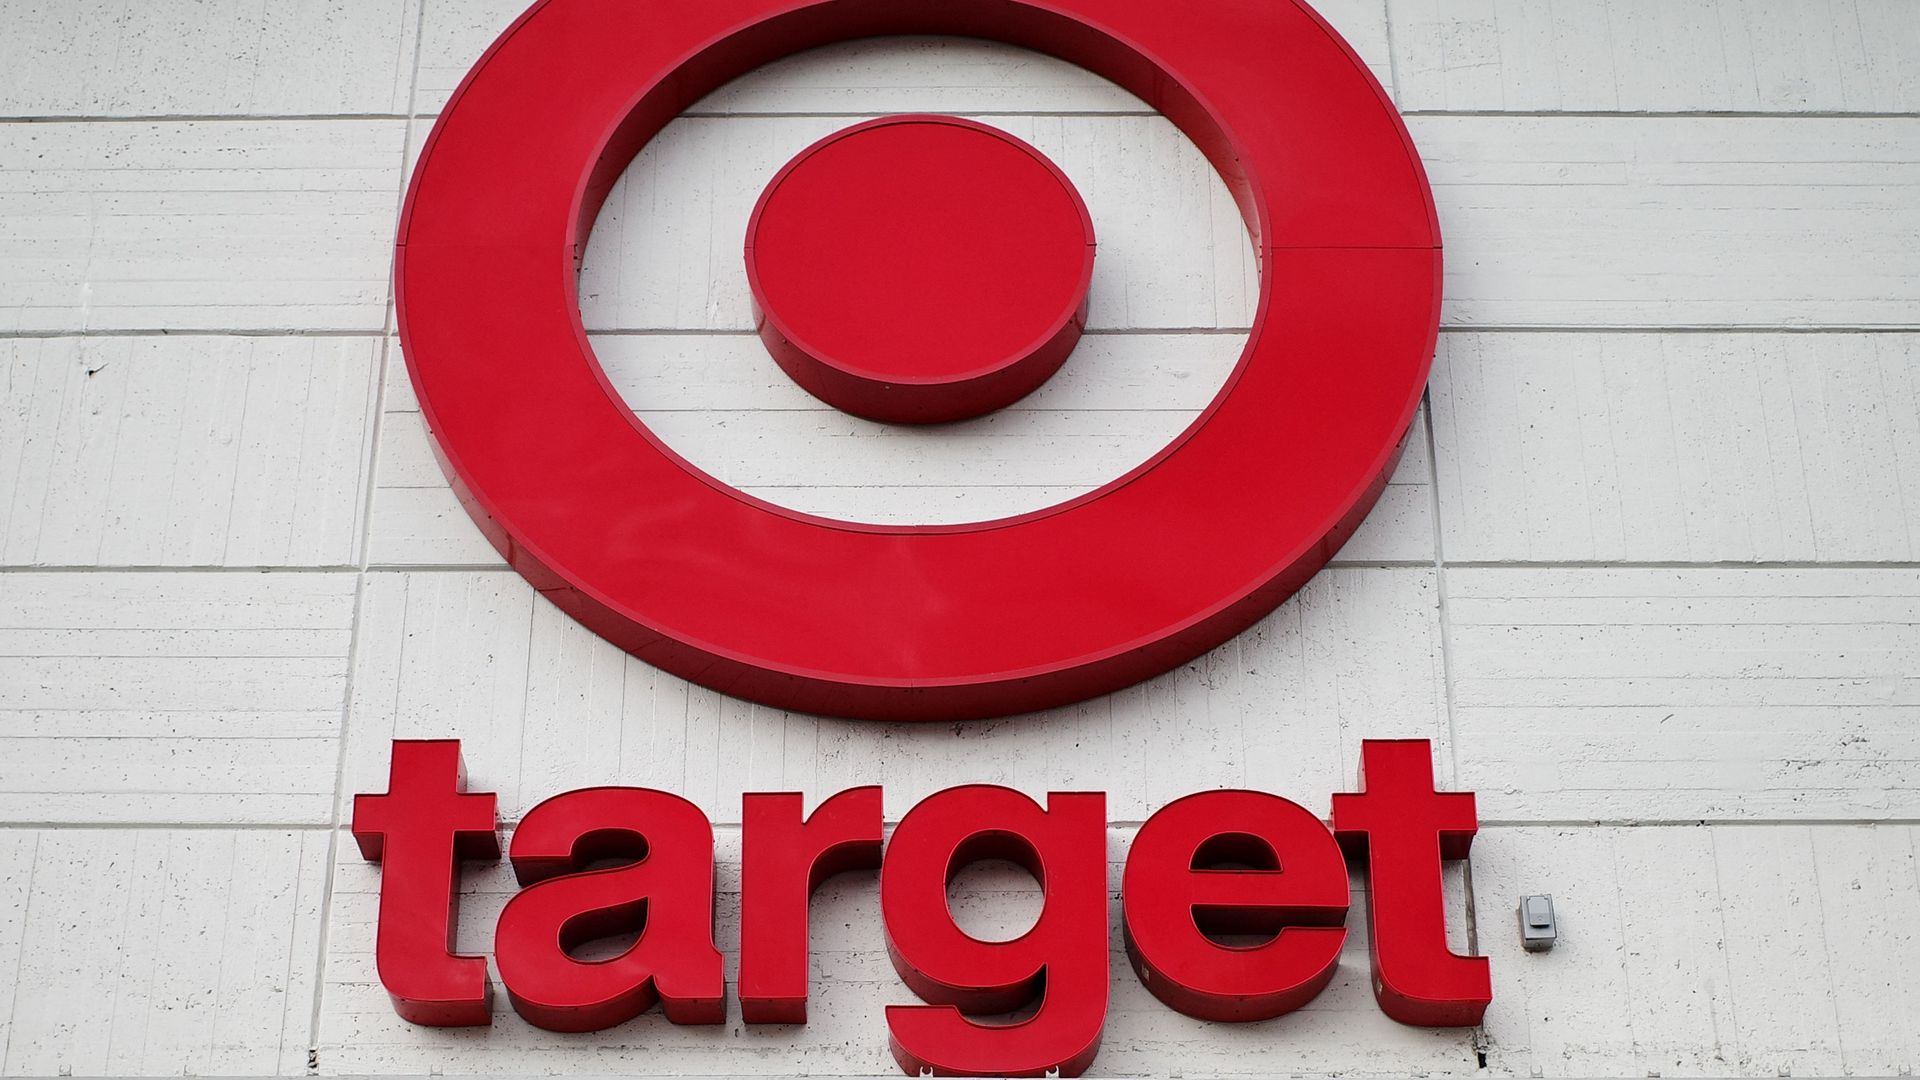 Department store Target's red logo appears on the side of one of its stores.